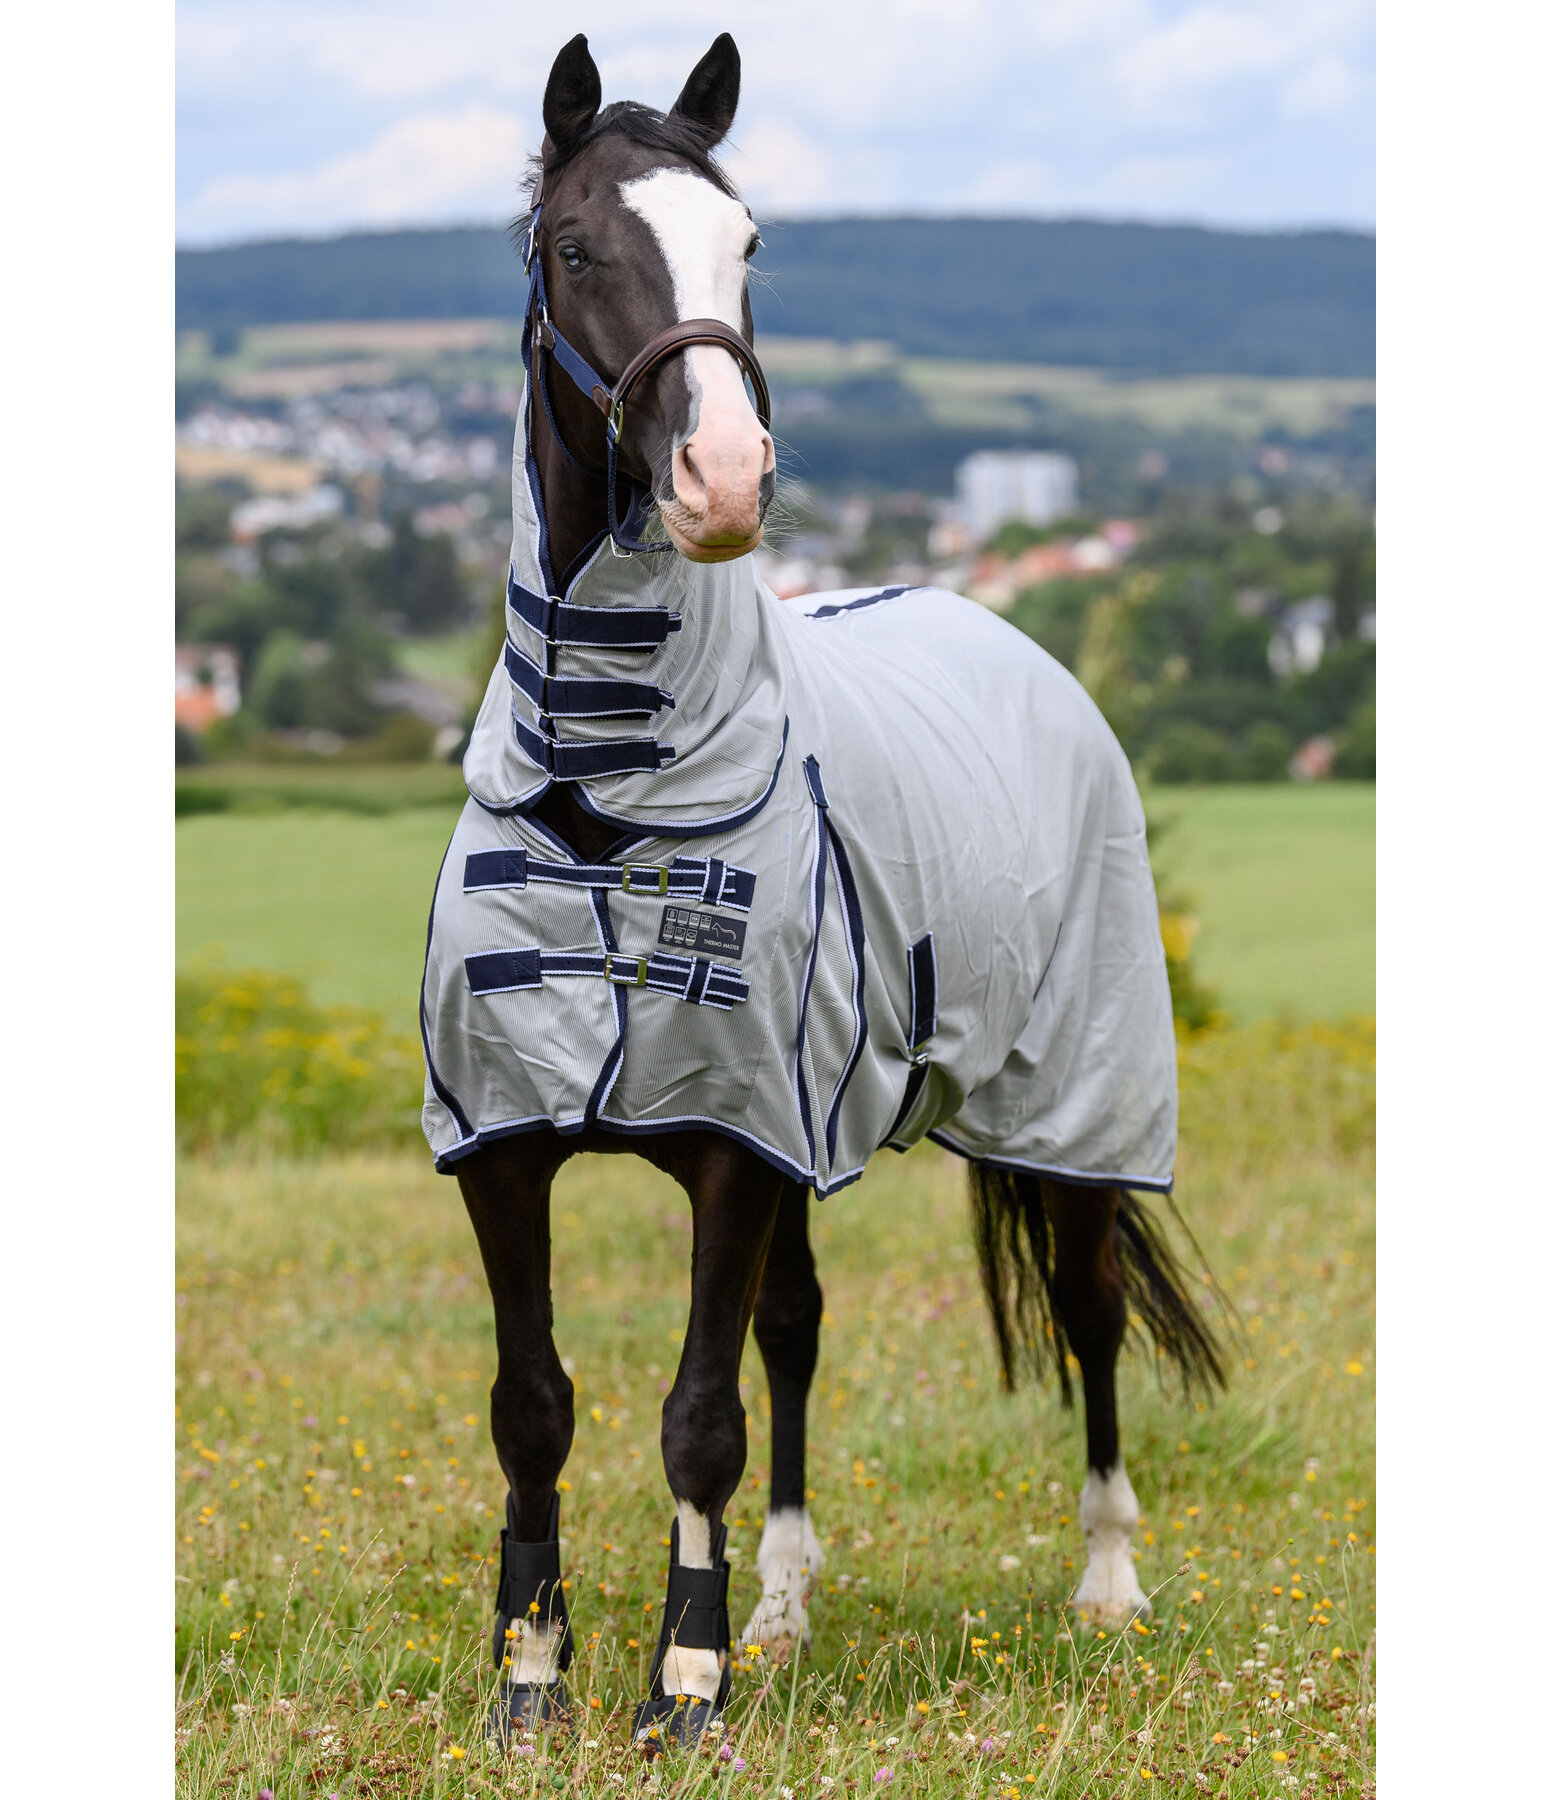 Full Neck Fly Rug with Retractable Neck